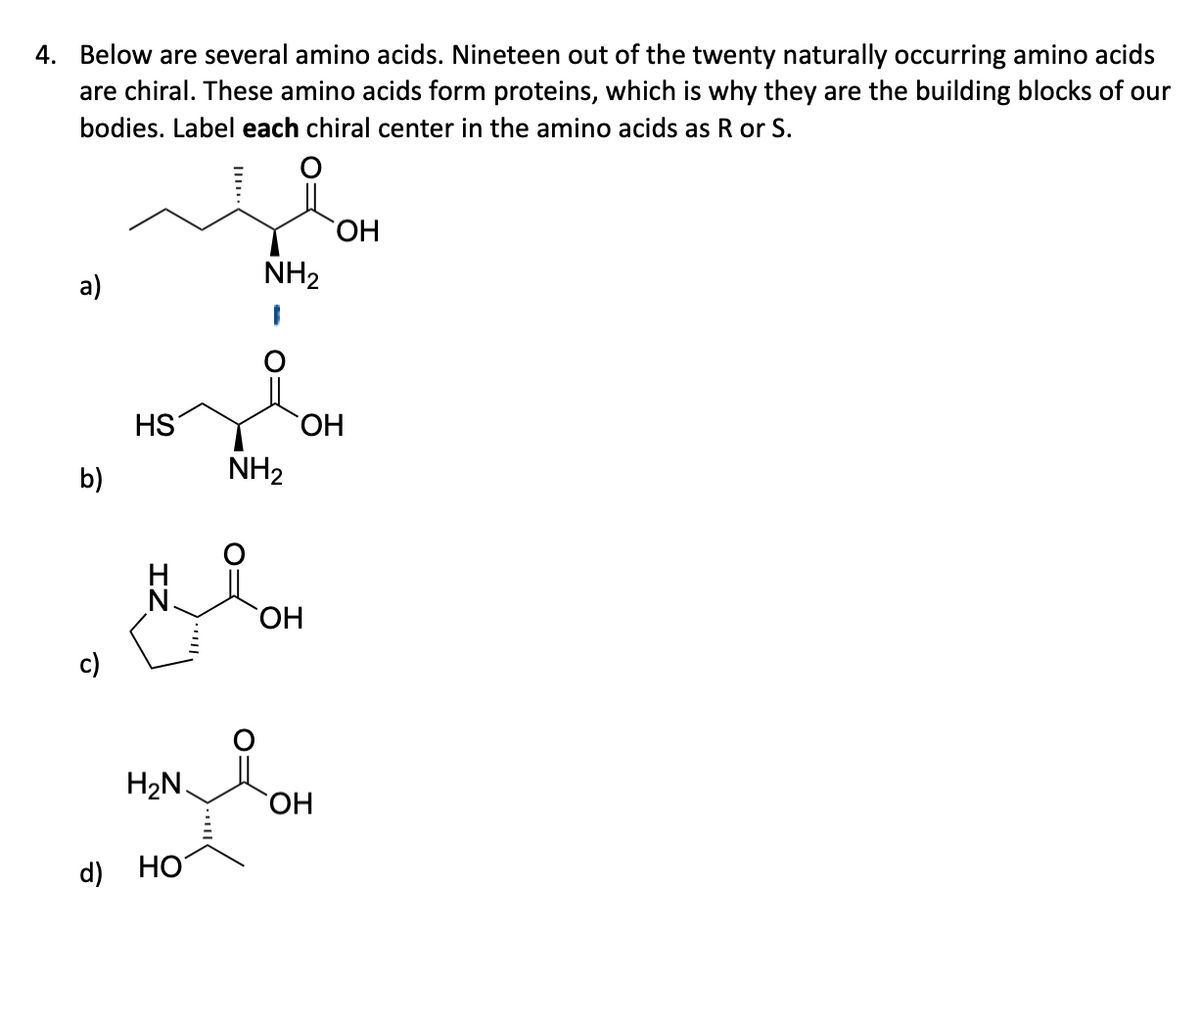 4. Below are several amino acids. Nineteen out of the twenty naturally occurring amino acids
are chiral. These amino acids form proteins, which is why they are the building blocks of our
bodies. Label each chiral center in the amino acids as R or S.
a)
b)
c)
d)
HS
H₂N.
HO
NH₂
NH₂
OH
OH
OH
OH